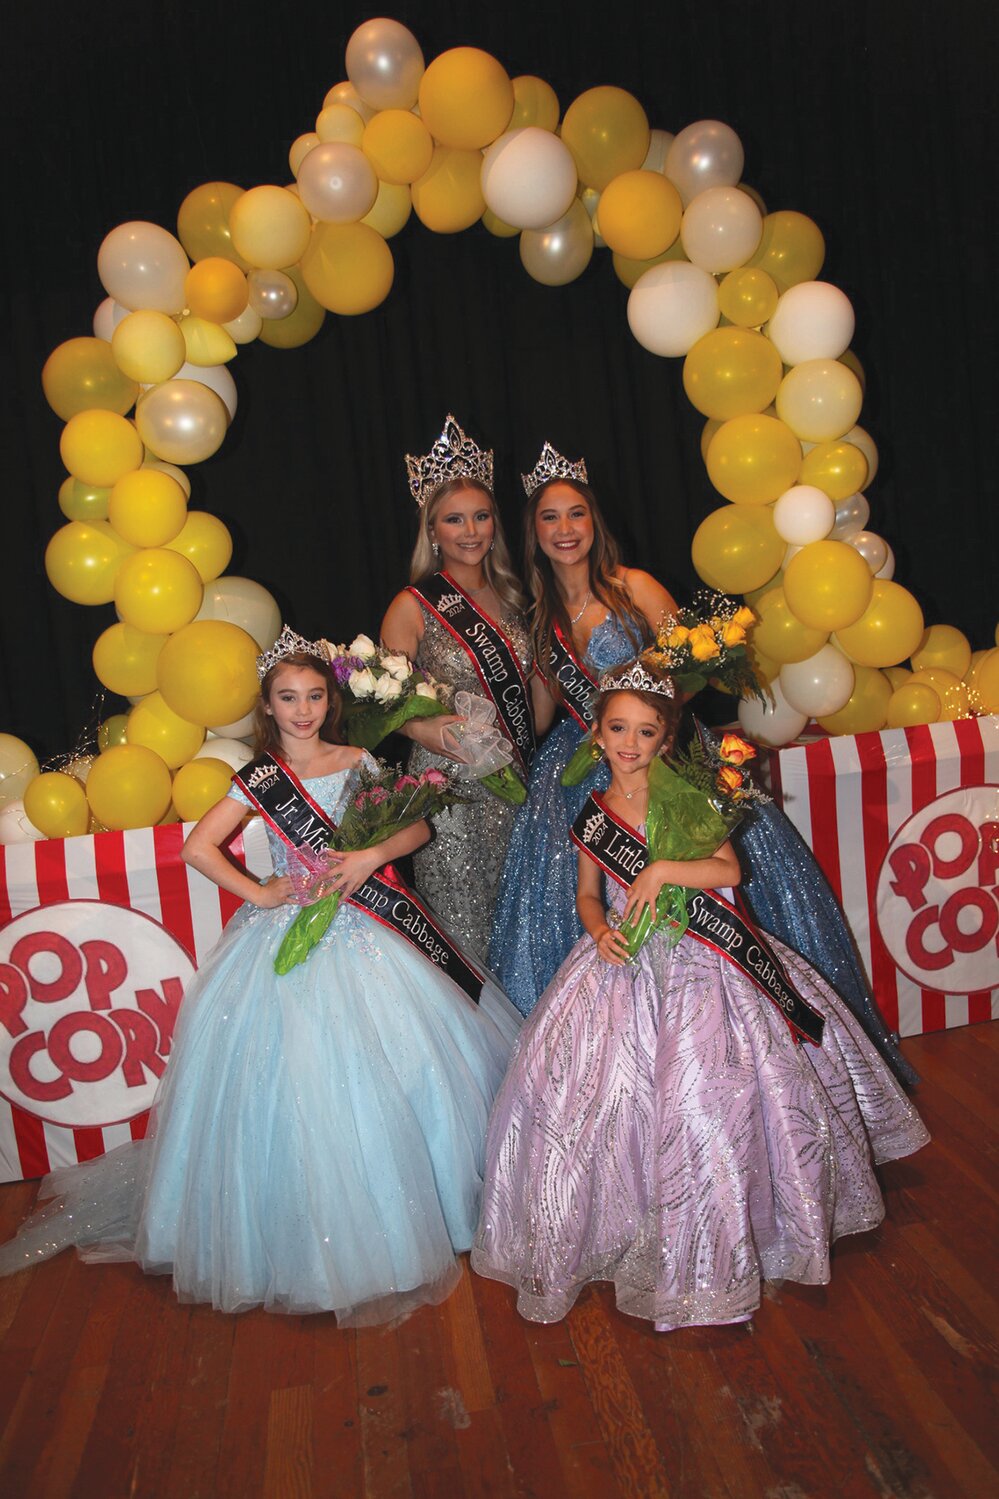 Winners of the 2024 Swamp Cabbage Queen & Princess Pagent held Feb. 3: Jr. Miss Remington Ergle (front left), Little Miss Elizabeth Drew Scalzi (front right), Queen Emmalee Grace (back left), Princess Micha Ross (back right). [Photo by Jerri Blake]